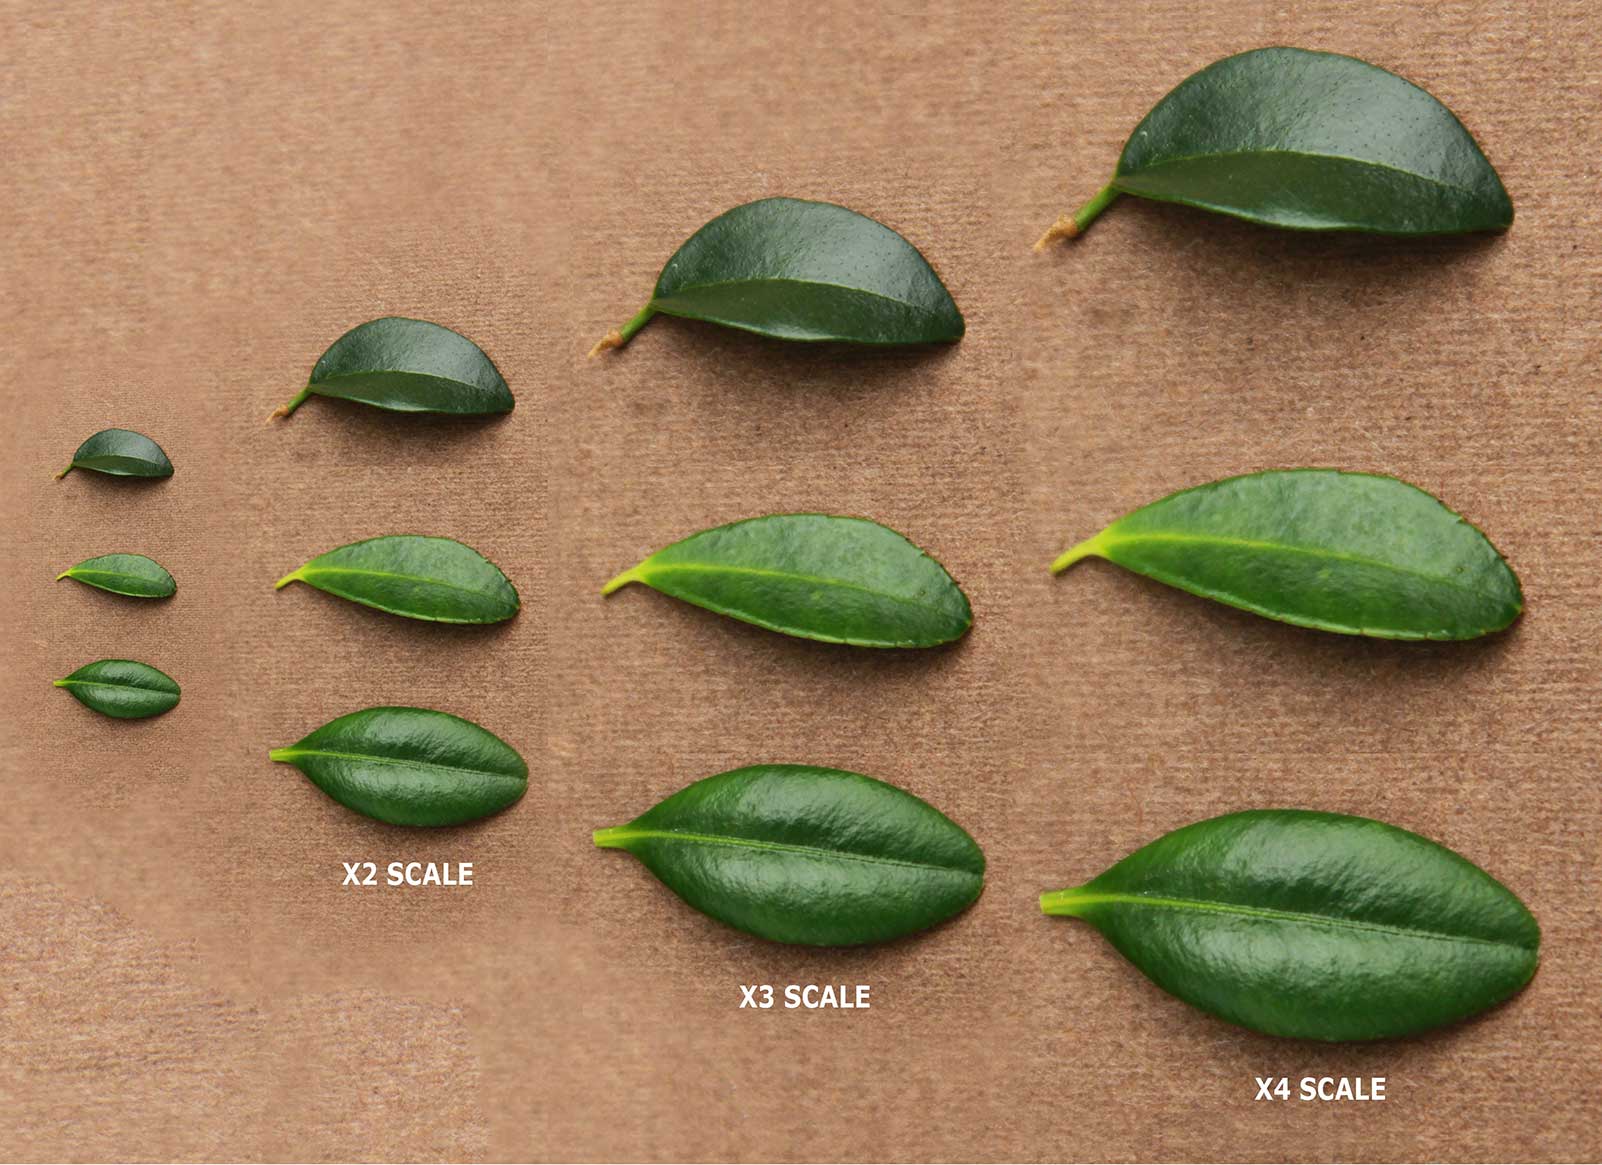 Leaves pictured are from: Buxus sempervirens, Ligustrum delavayanum and Ilex crenata ‘Kinme’ plants in no particular order